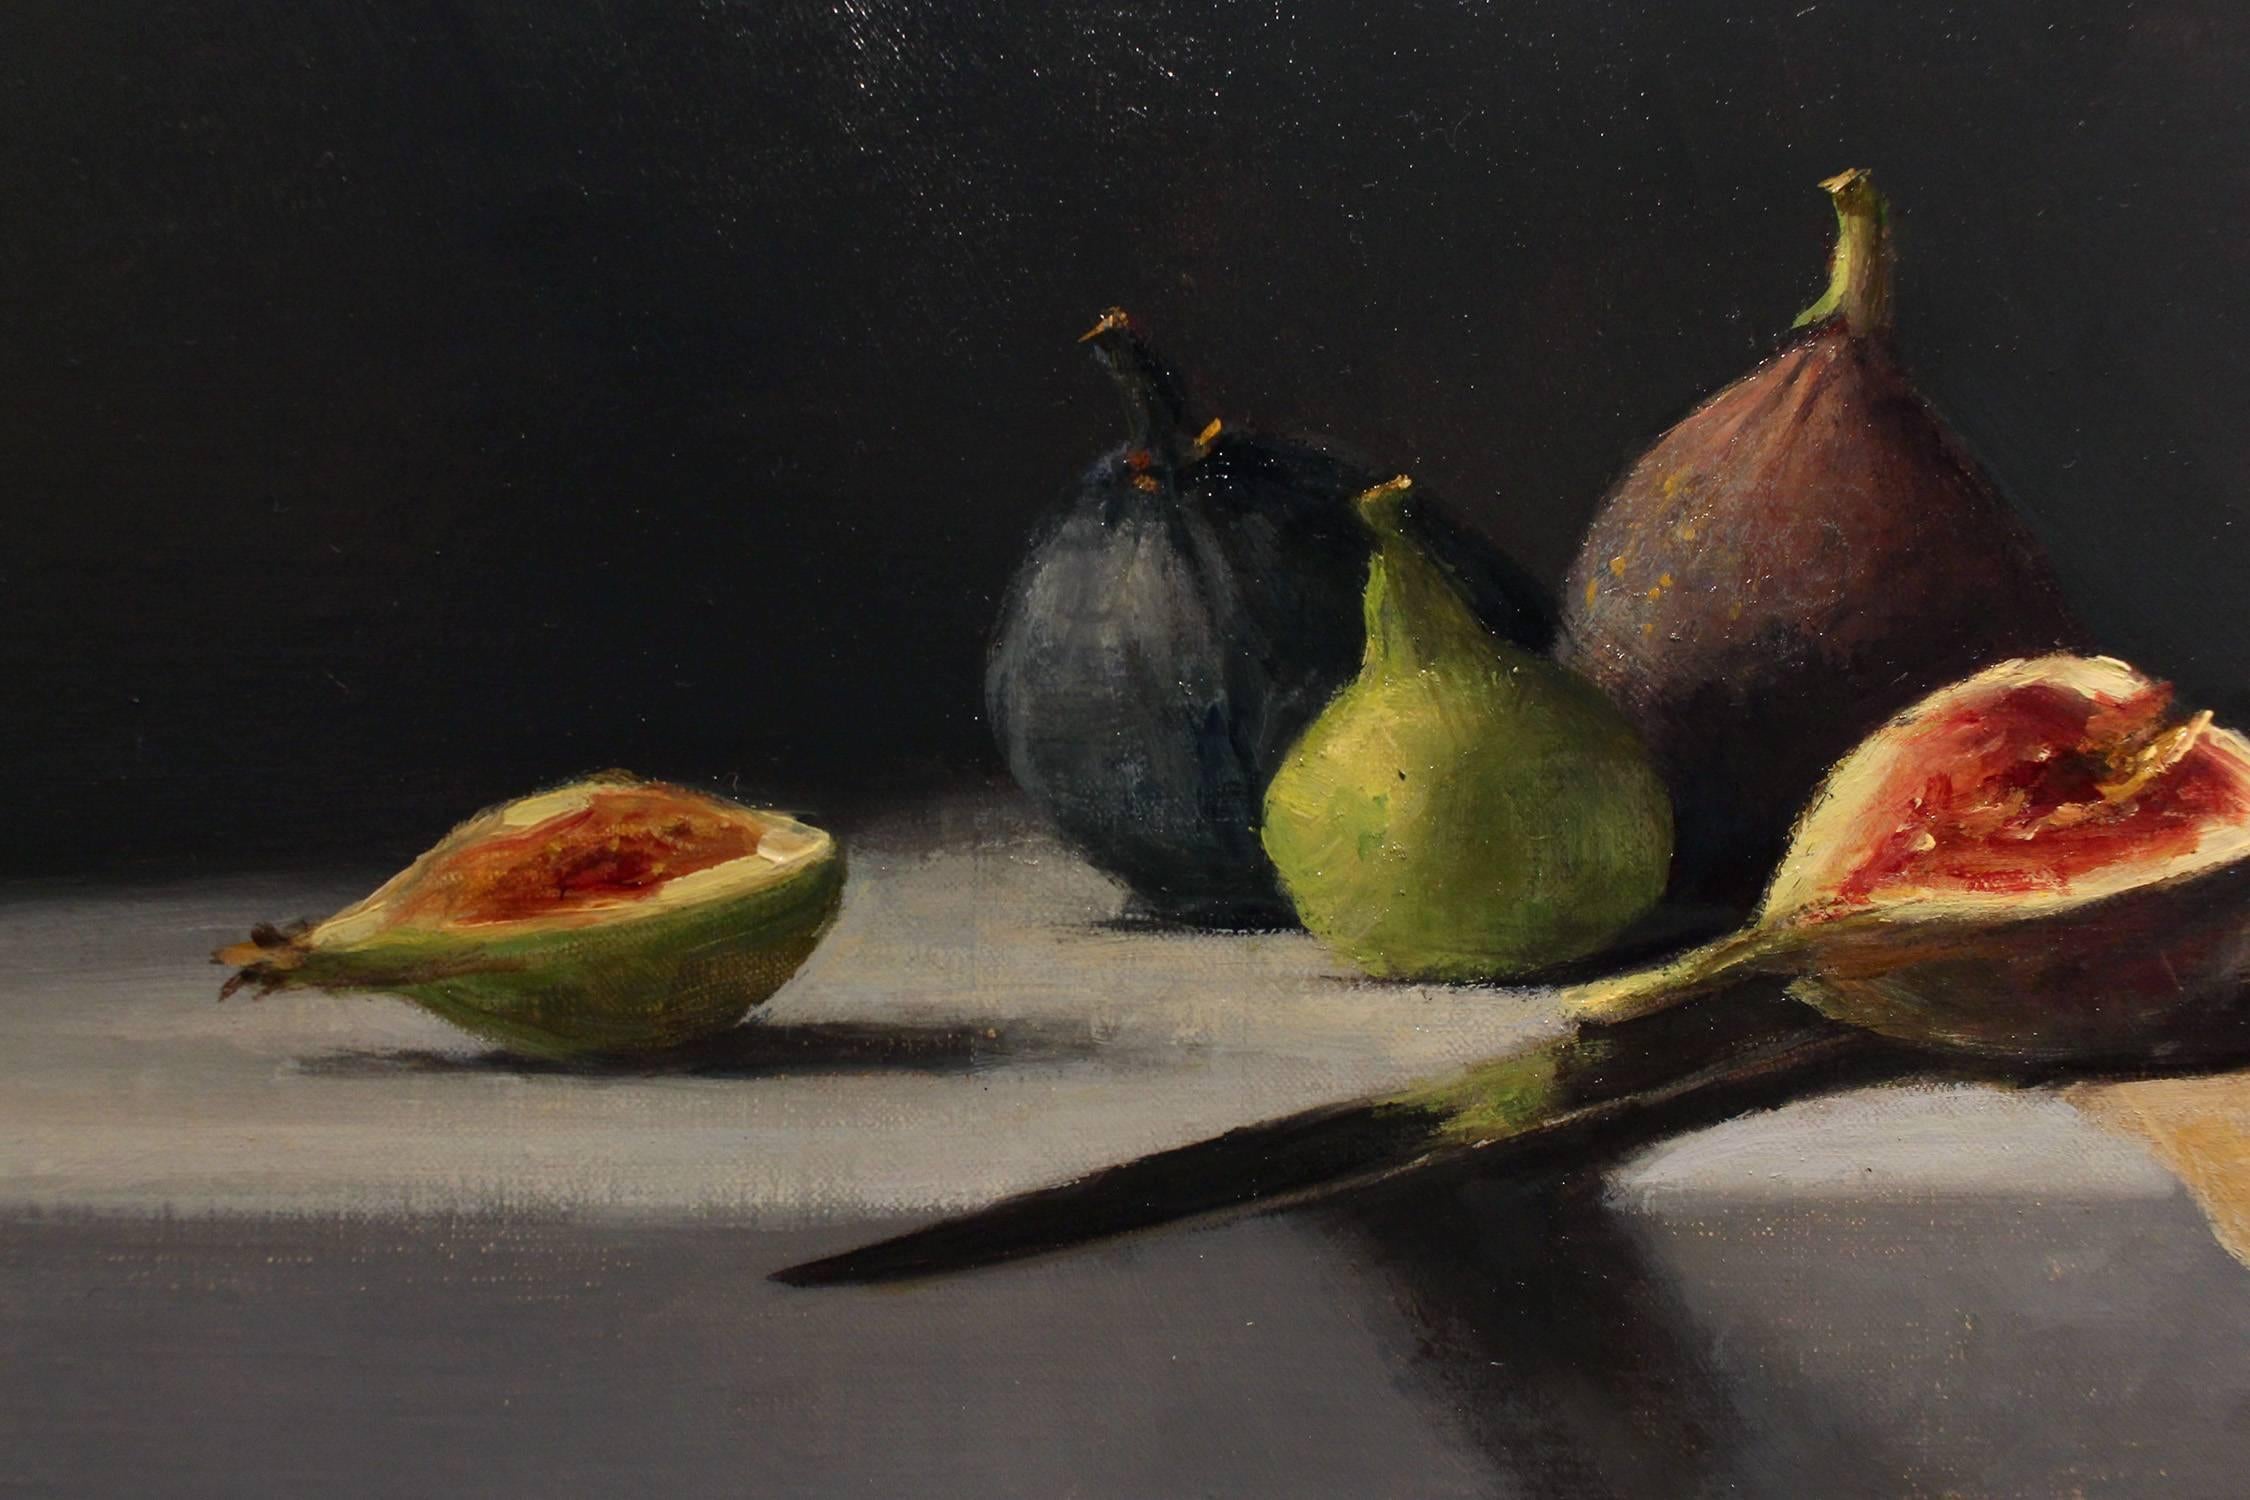 L’Explorateur and Figs - Painting by Sarah Lamb